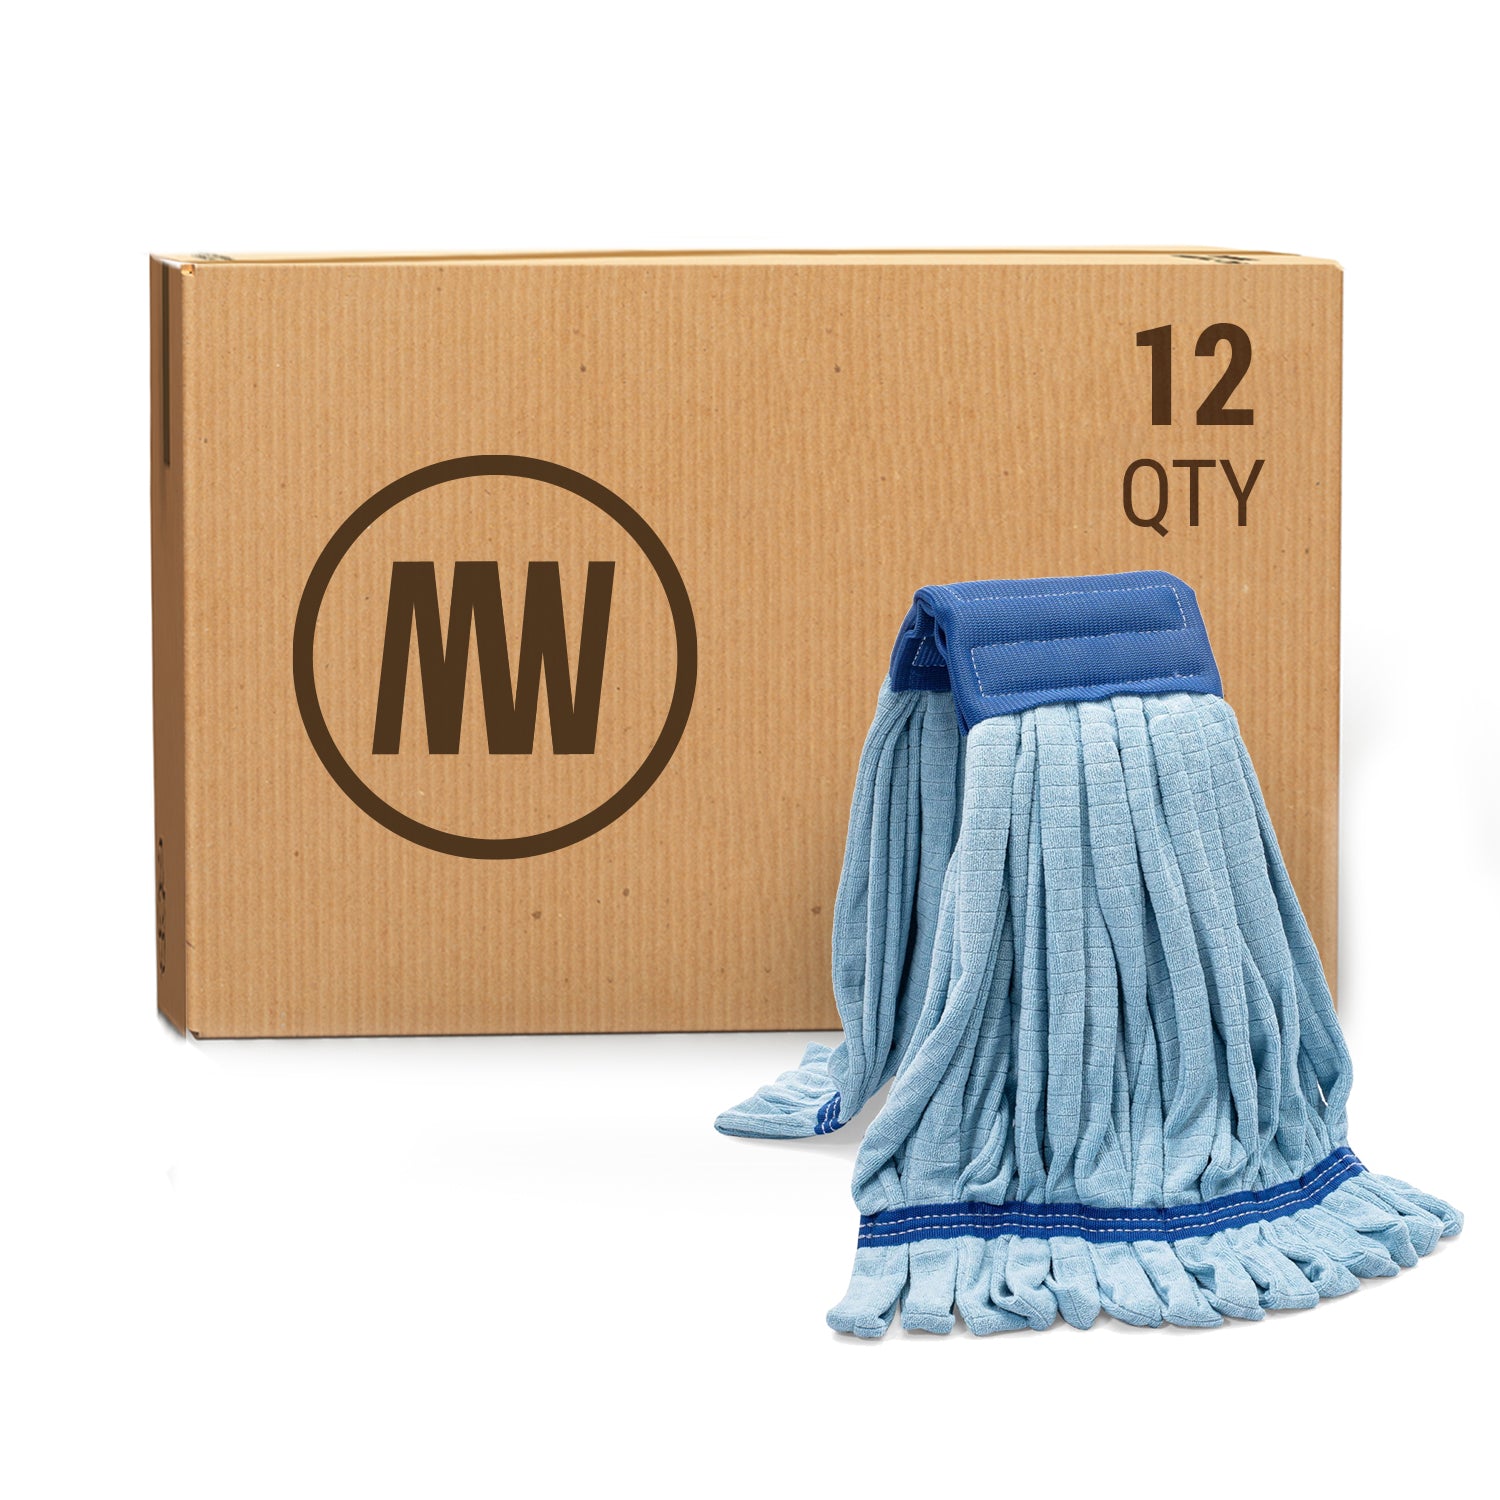 Large Commercial Microfiber Tube Mop - Case of 12